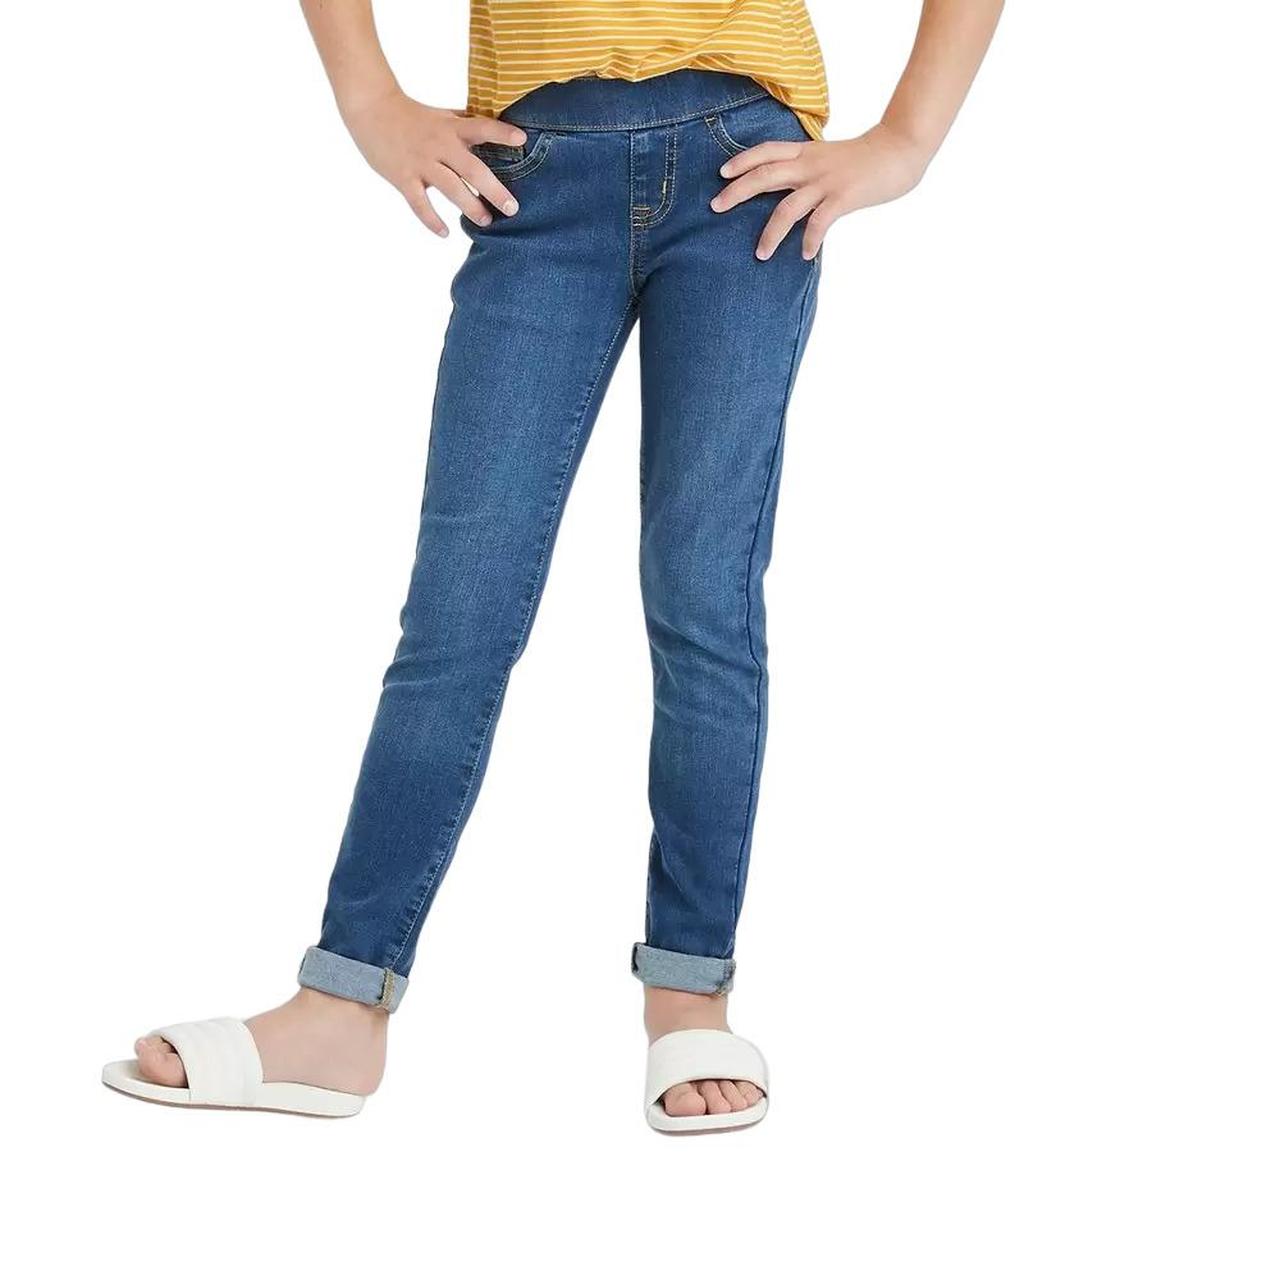 Shascullfites Mid Rise Pull On Stretch Skinny Jeans Mom Jeans Dark Blue  Jeggings